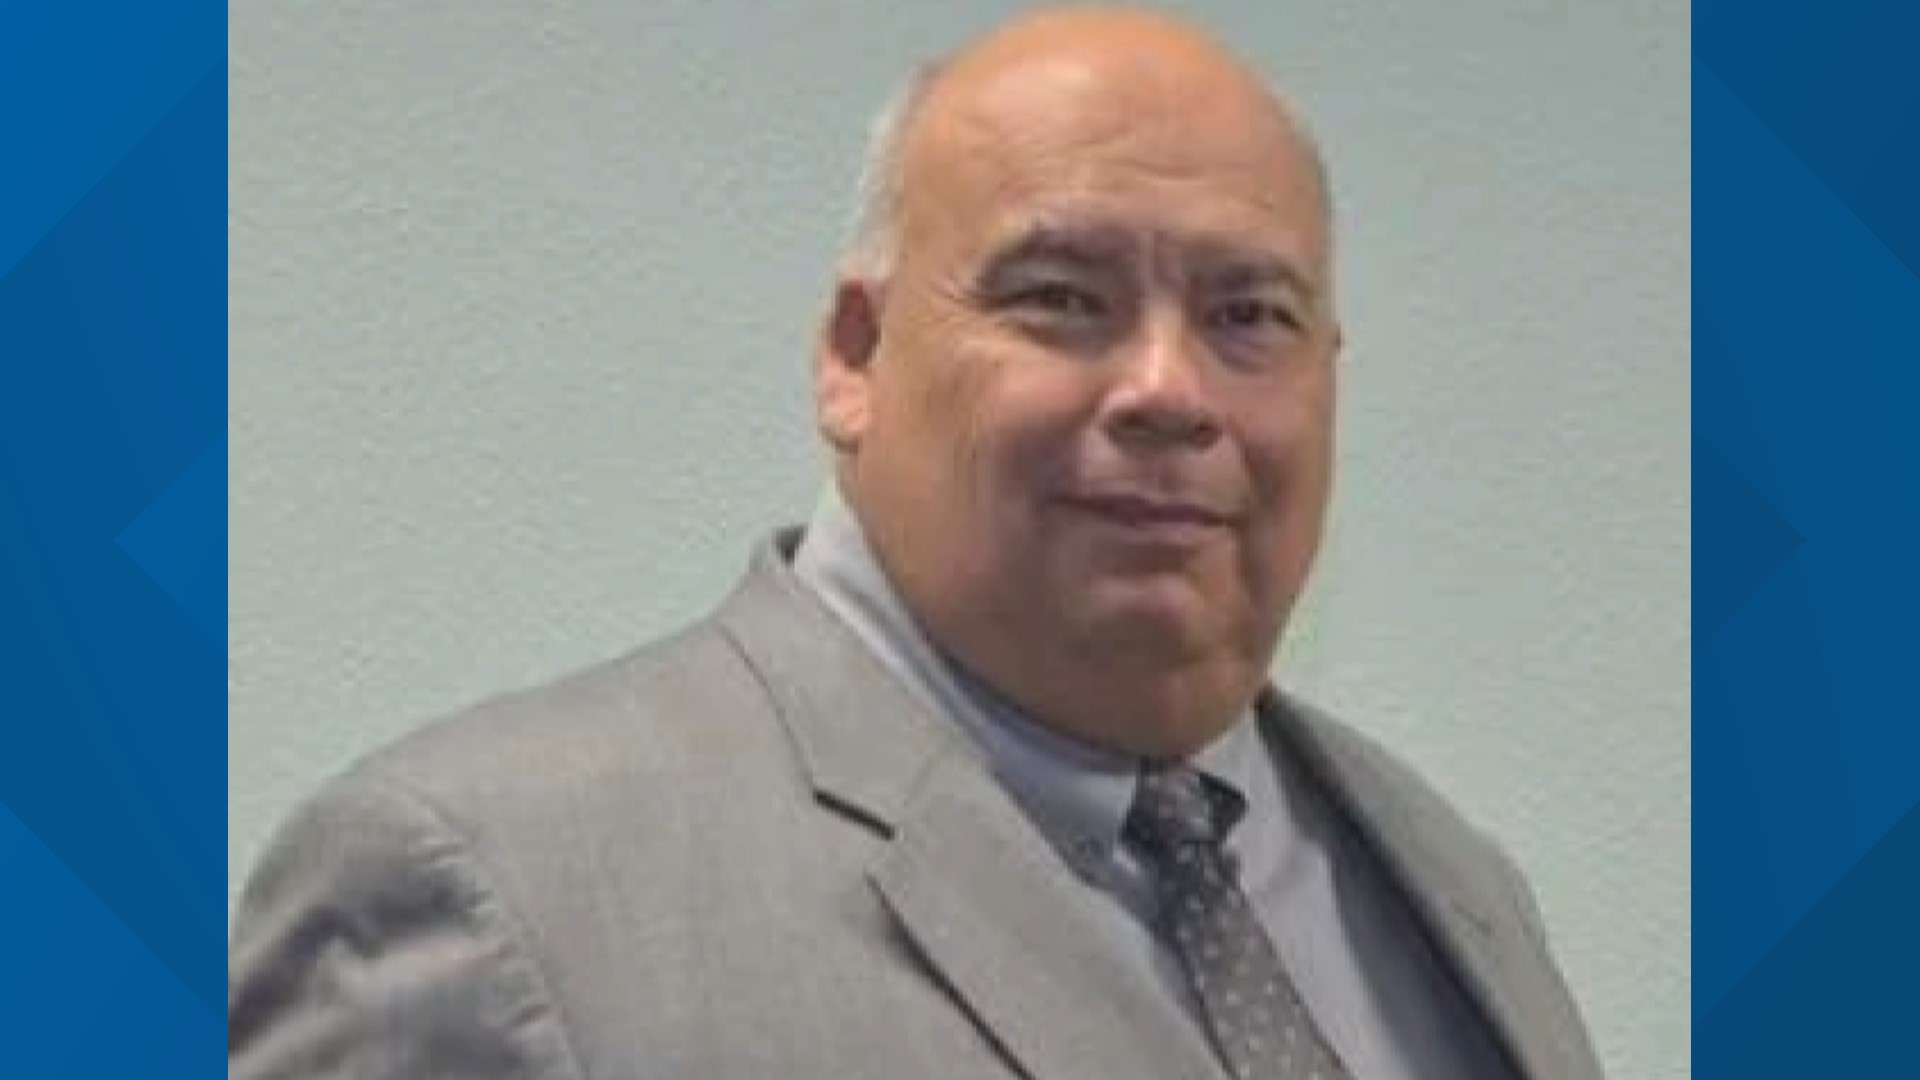 Edmundo Calderon, the Chief Internal Auditor with the City of El Paso, is alleging Gonzalez retaliated against him after he audited fuel card usage by officials.